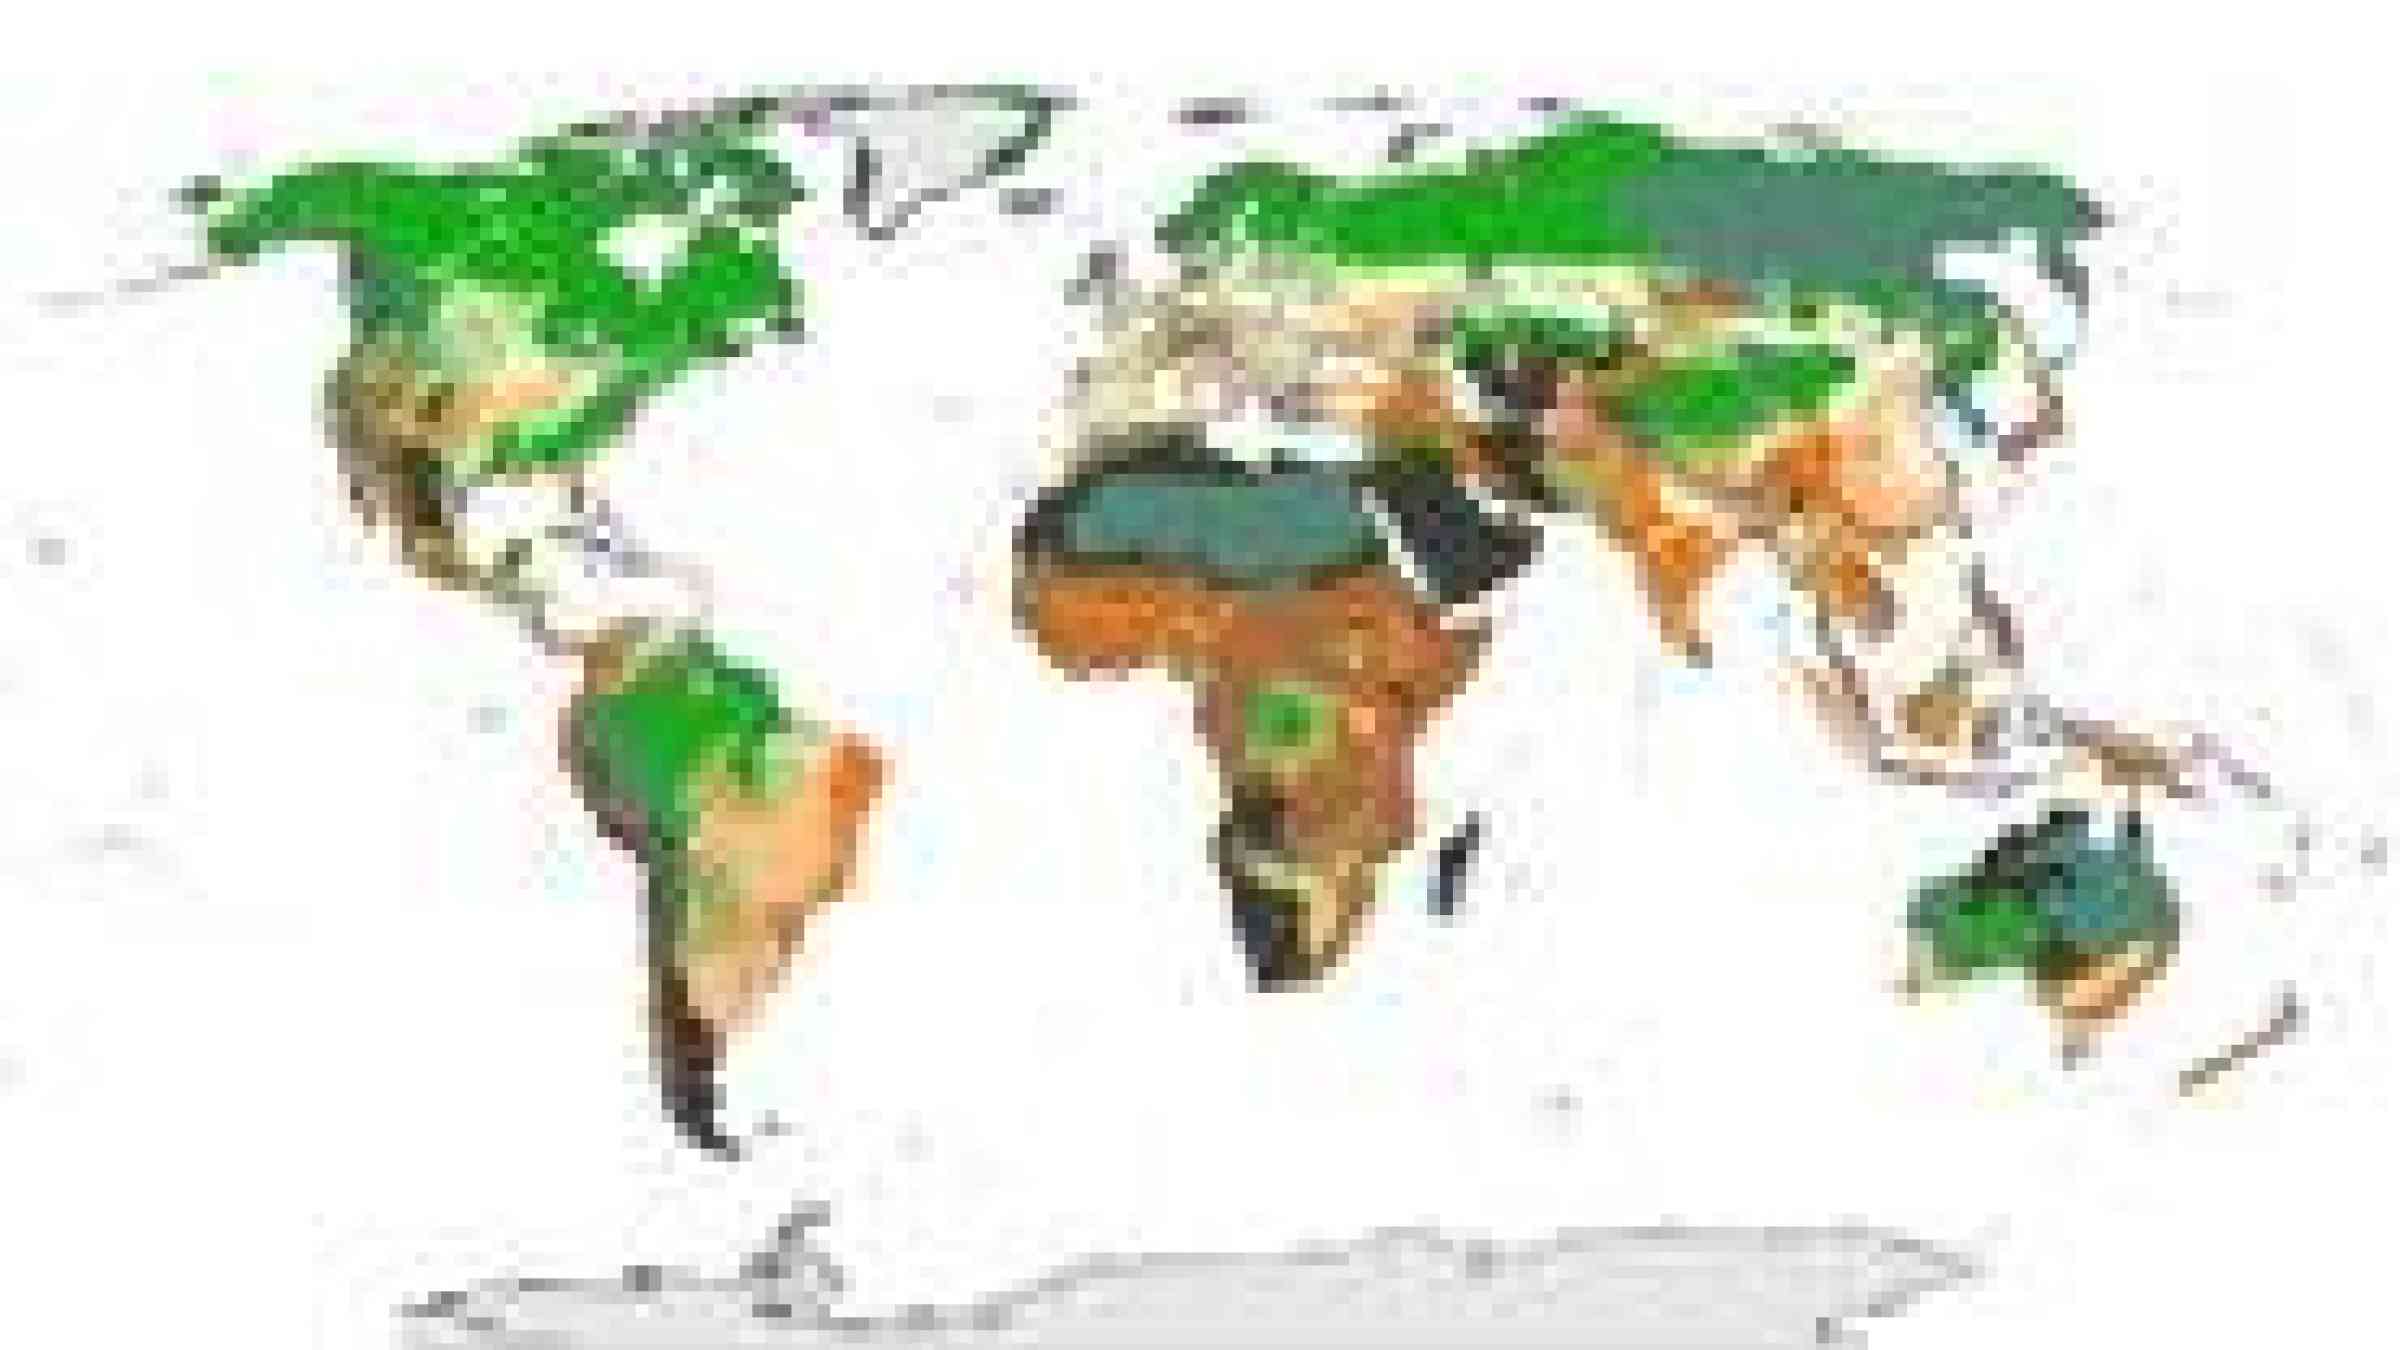 The map illustrates the global distribution of the climate stability/ecoregional intactness relationship. Ecoregions with both high climate stability and vegetation intactness are dark grey. Ecoregions with high climate stability but low levels of vegetation intactness are dark orange. Ecoregions with low climate stability but high vegetation intactness are dark green. Ecoregions that have both low climate stability and low levels of vegetation intactness are pale cream. (Credit: WCS)